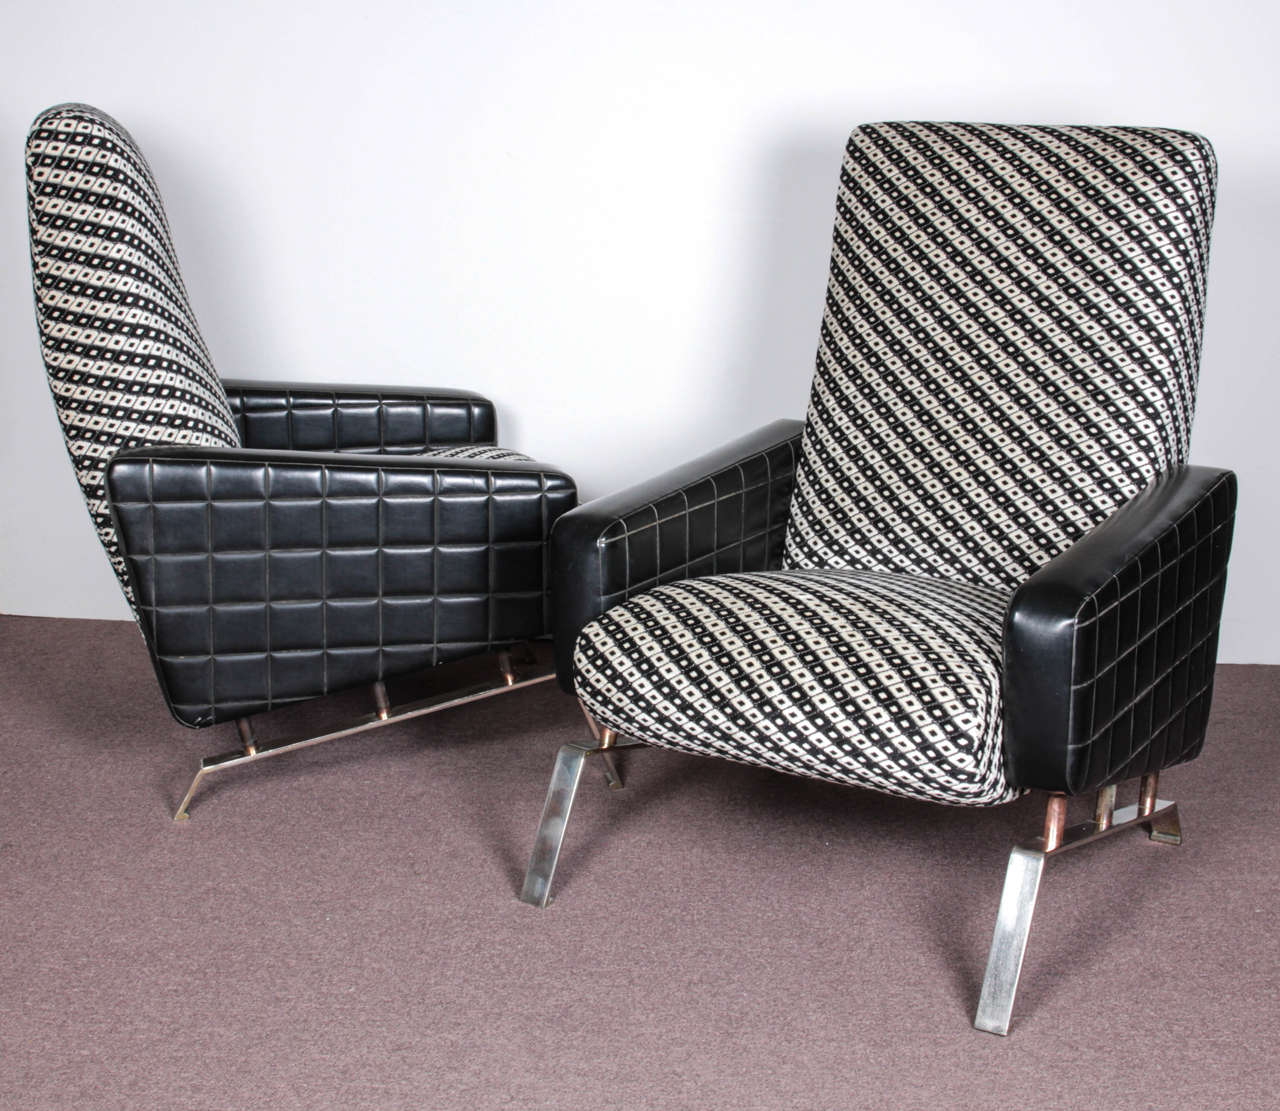 Pair of Italian, wildly stylish tall back lounge chairs of aerodynamic design with original angular nickeled iron bases and original Naugahyde tufted sides. 
The backrest and seats have been newly upholstered in a funky black and white check